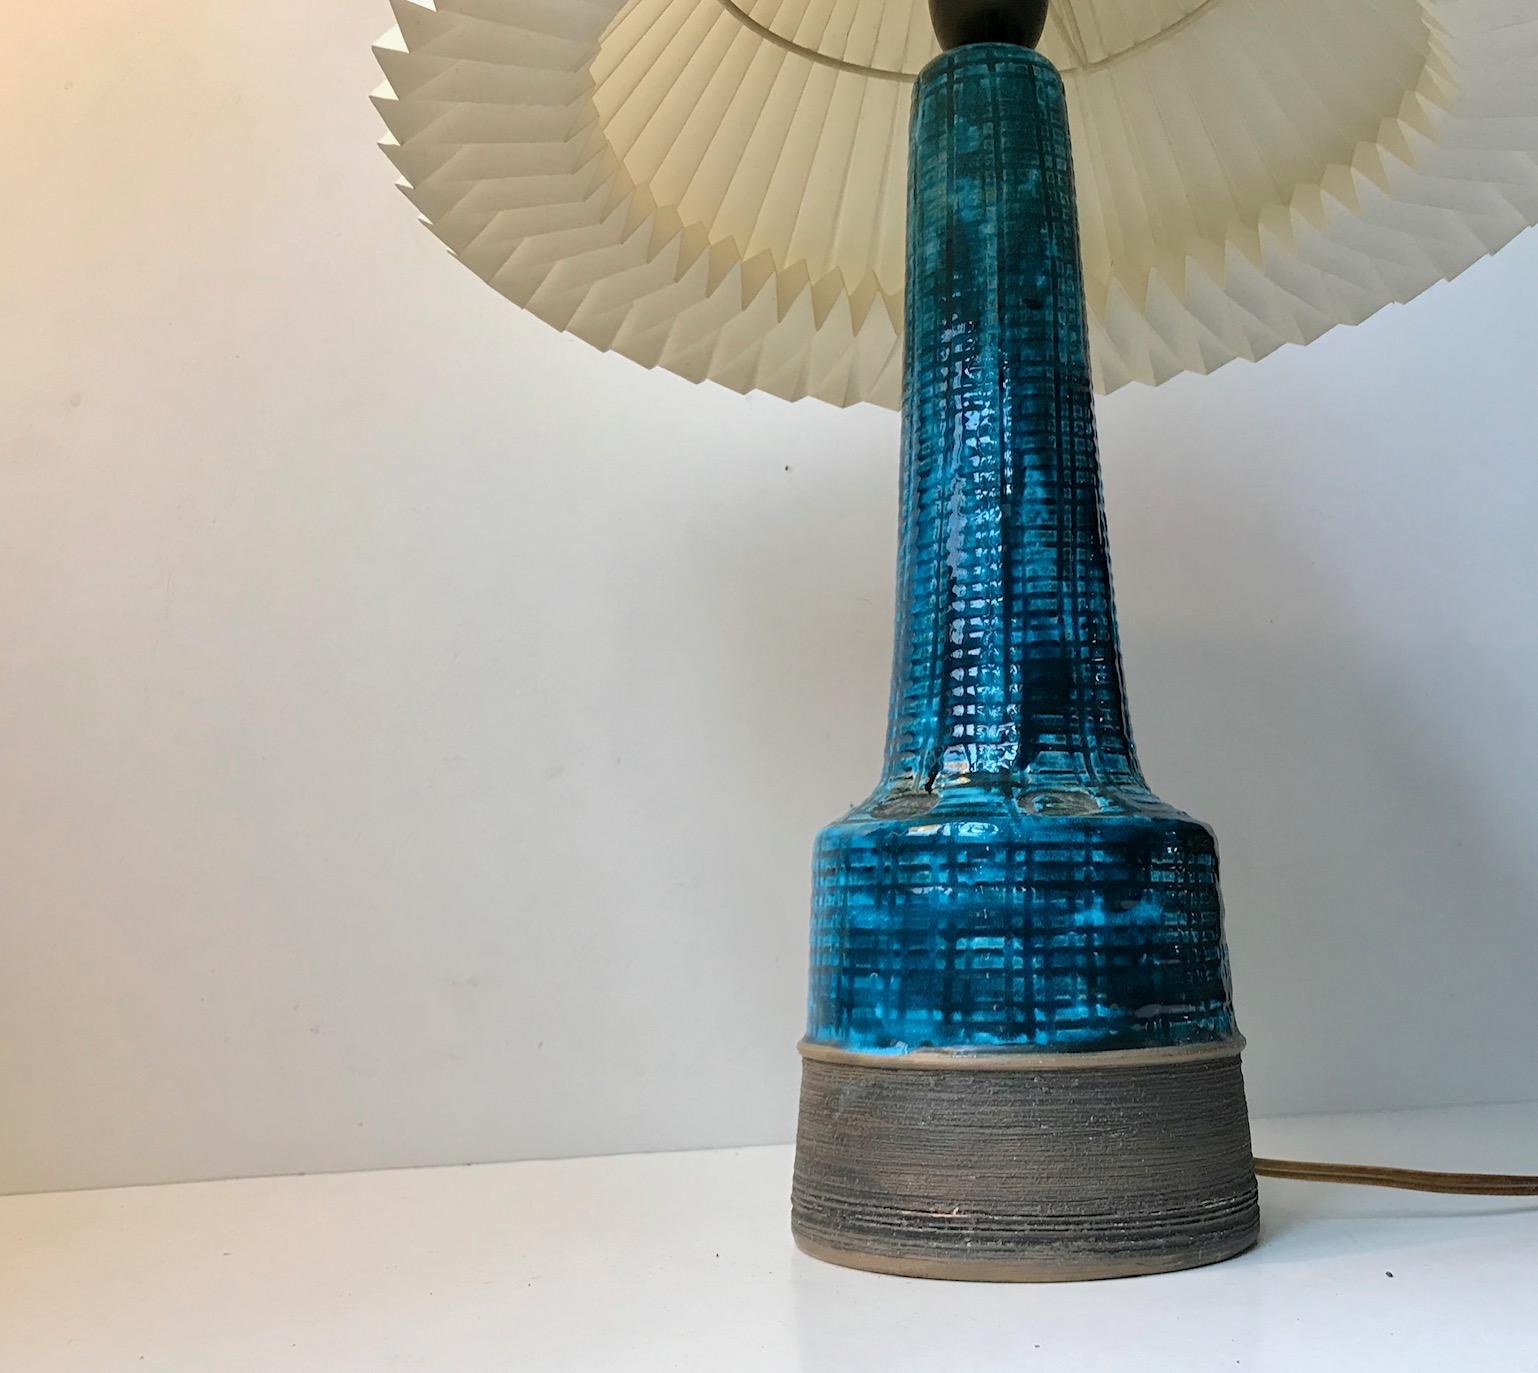 A tall gourd shaped ceramic table lamp with relief/ribbings and applied turquoise glaze, Rimini blue. It was designed by Aldo Londi and manufactured by Bitossi in Italy during the 1960s. It is signed/marked to the base indistinguishable. The light